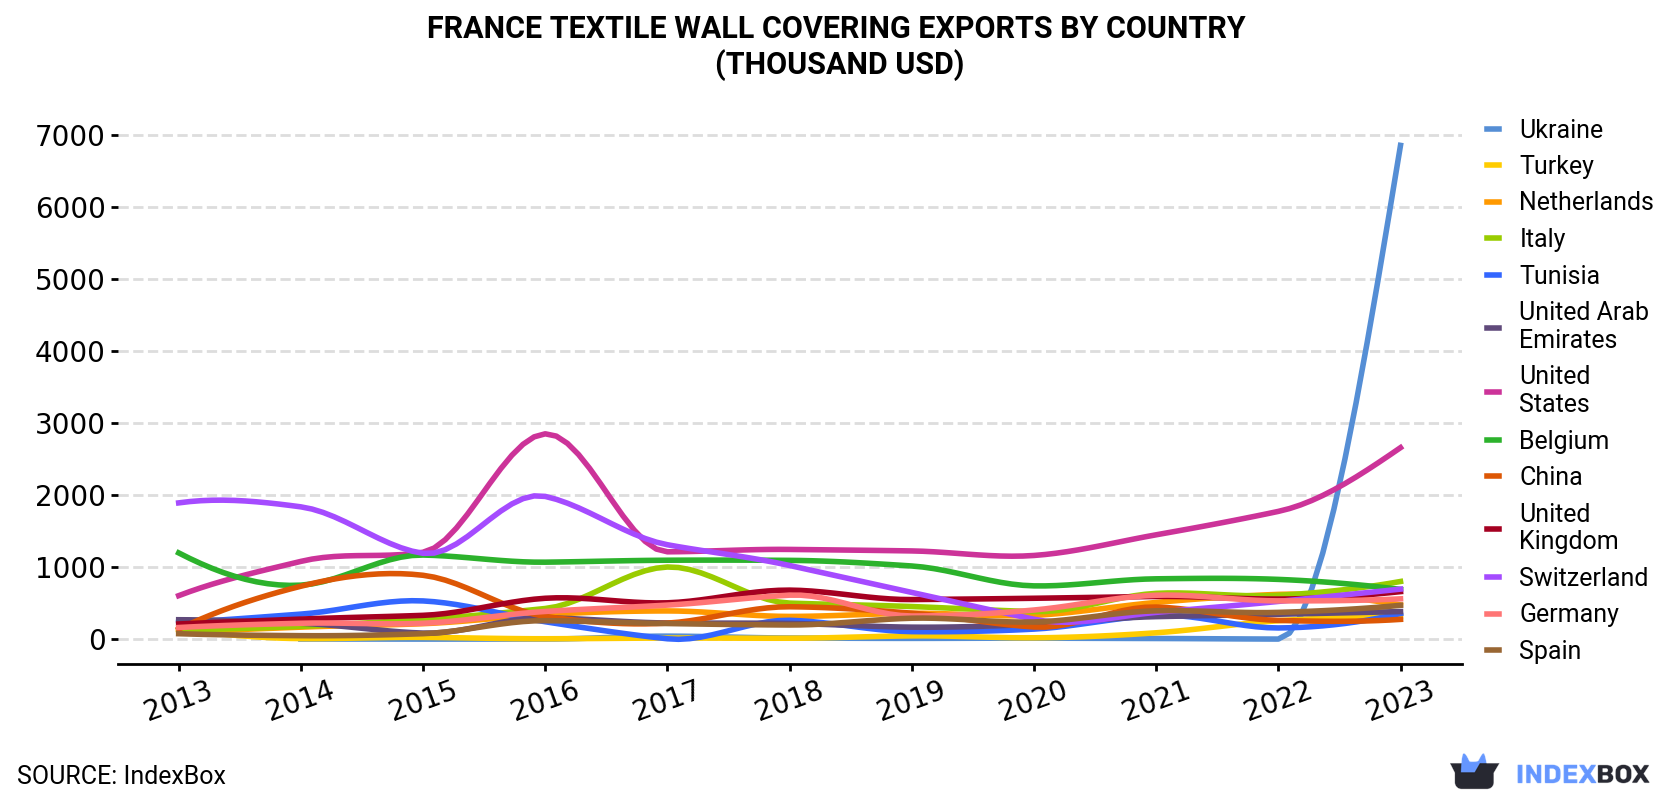 France Textile Wall Covering Exports By Country (Thousand USD)